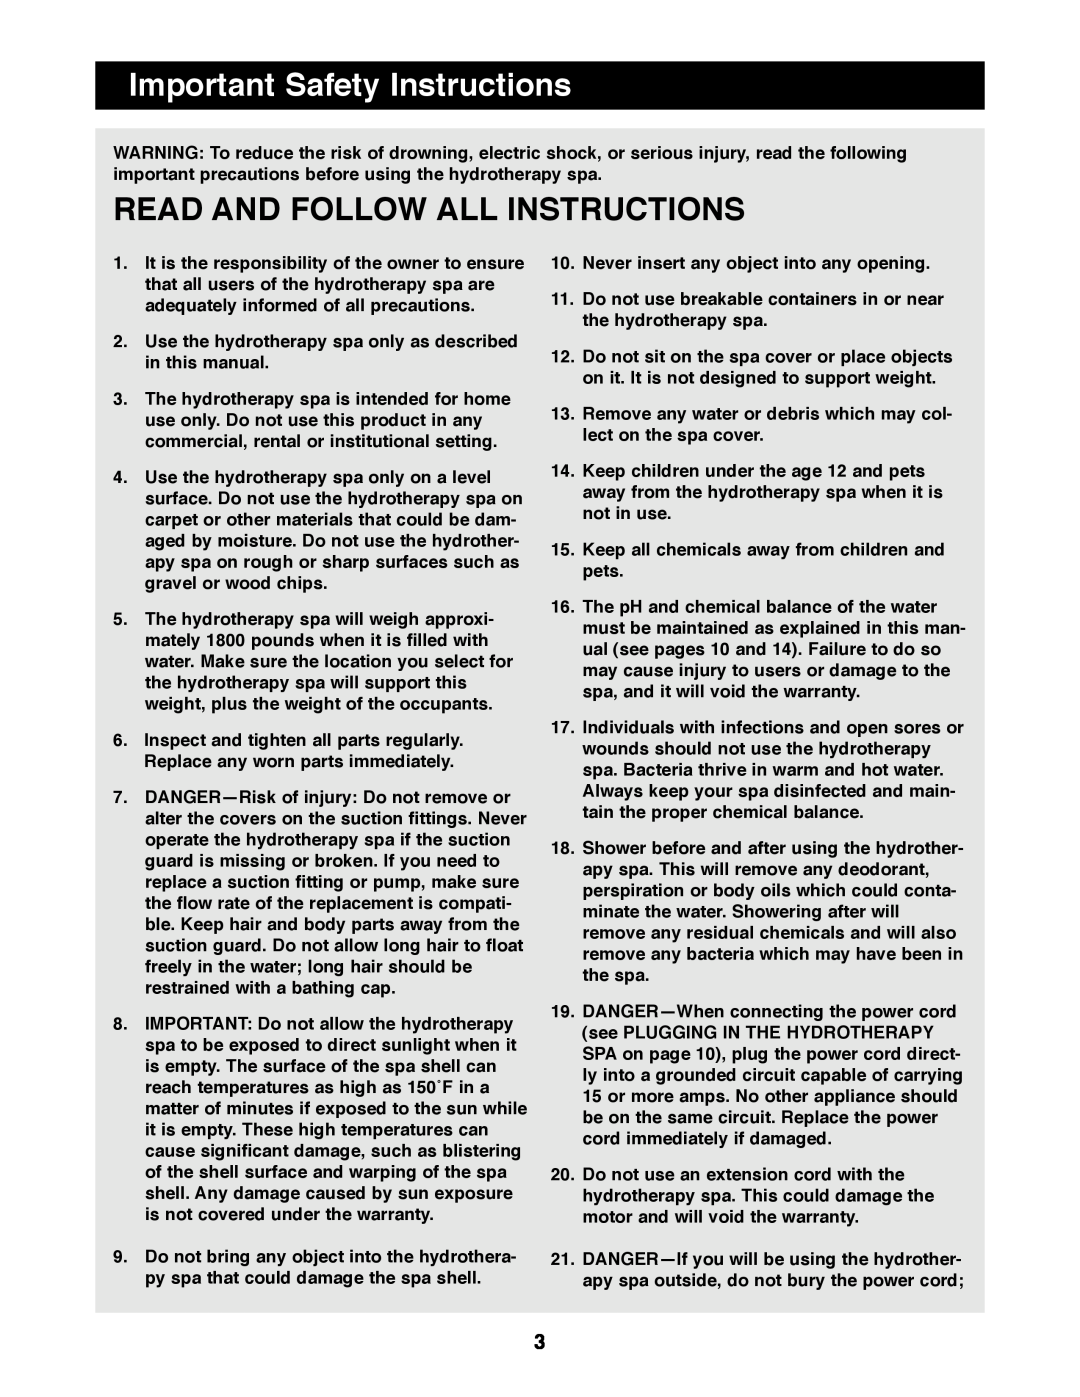 Weslo WLHS86090 manual Important Safety Instructions, Read And Follow All Instructions 